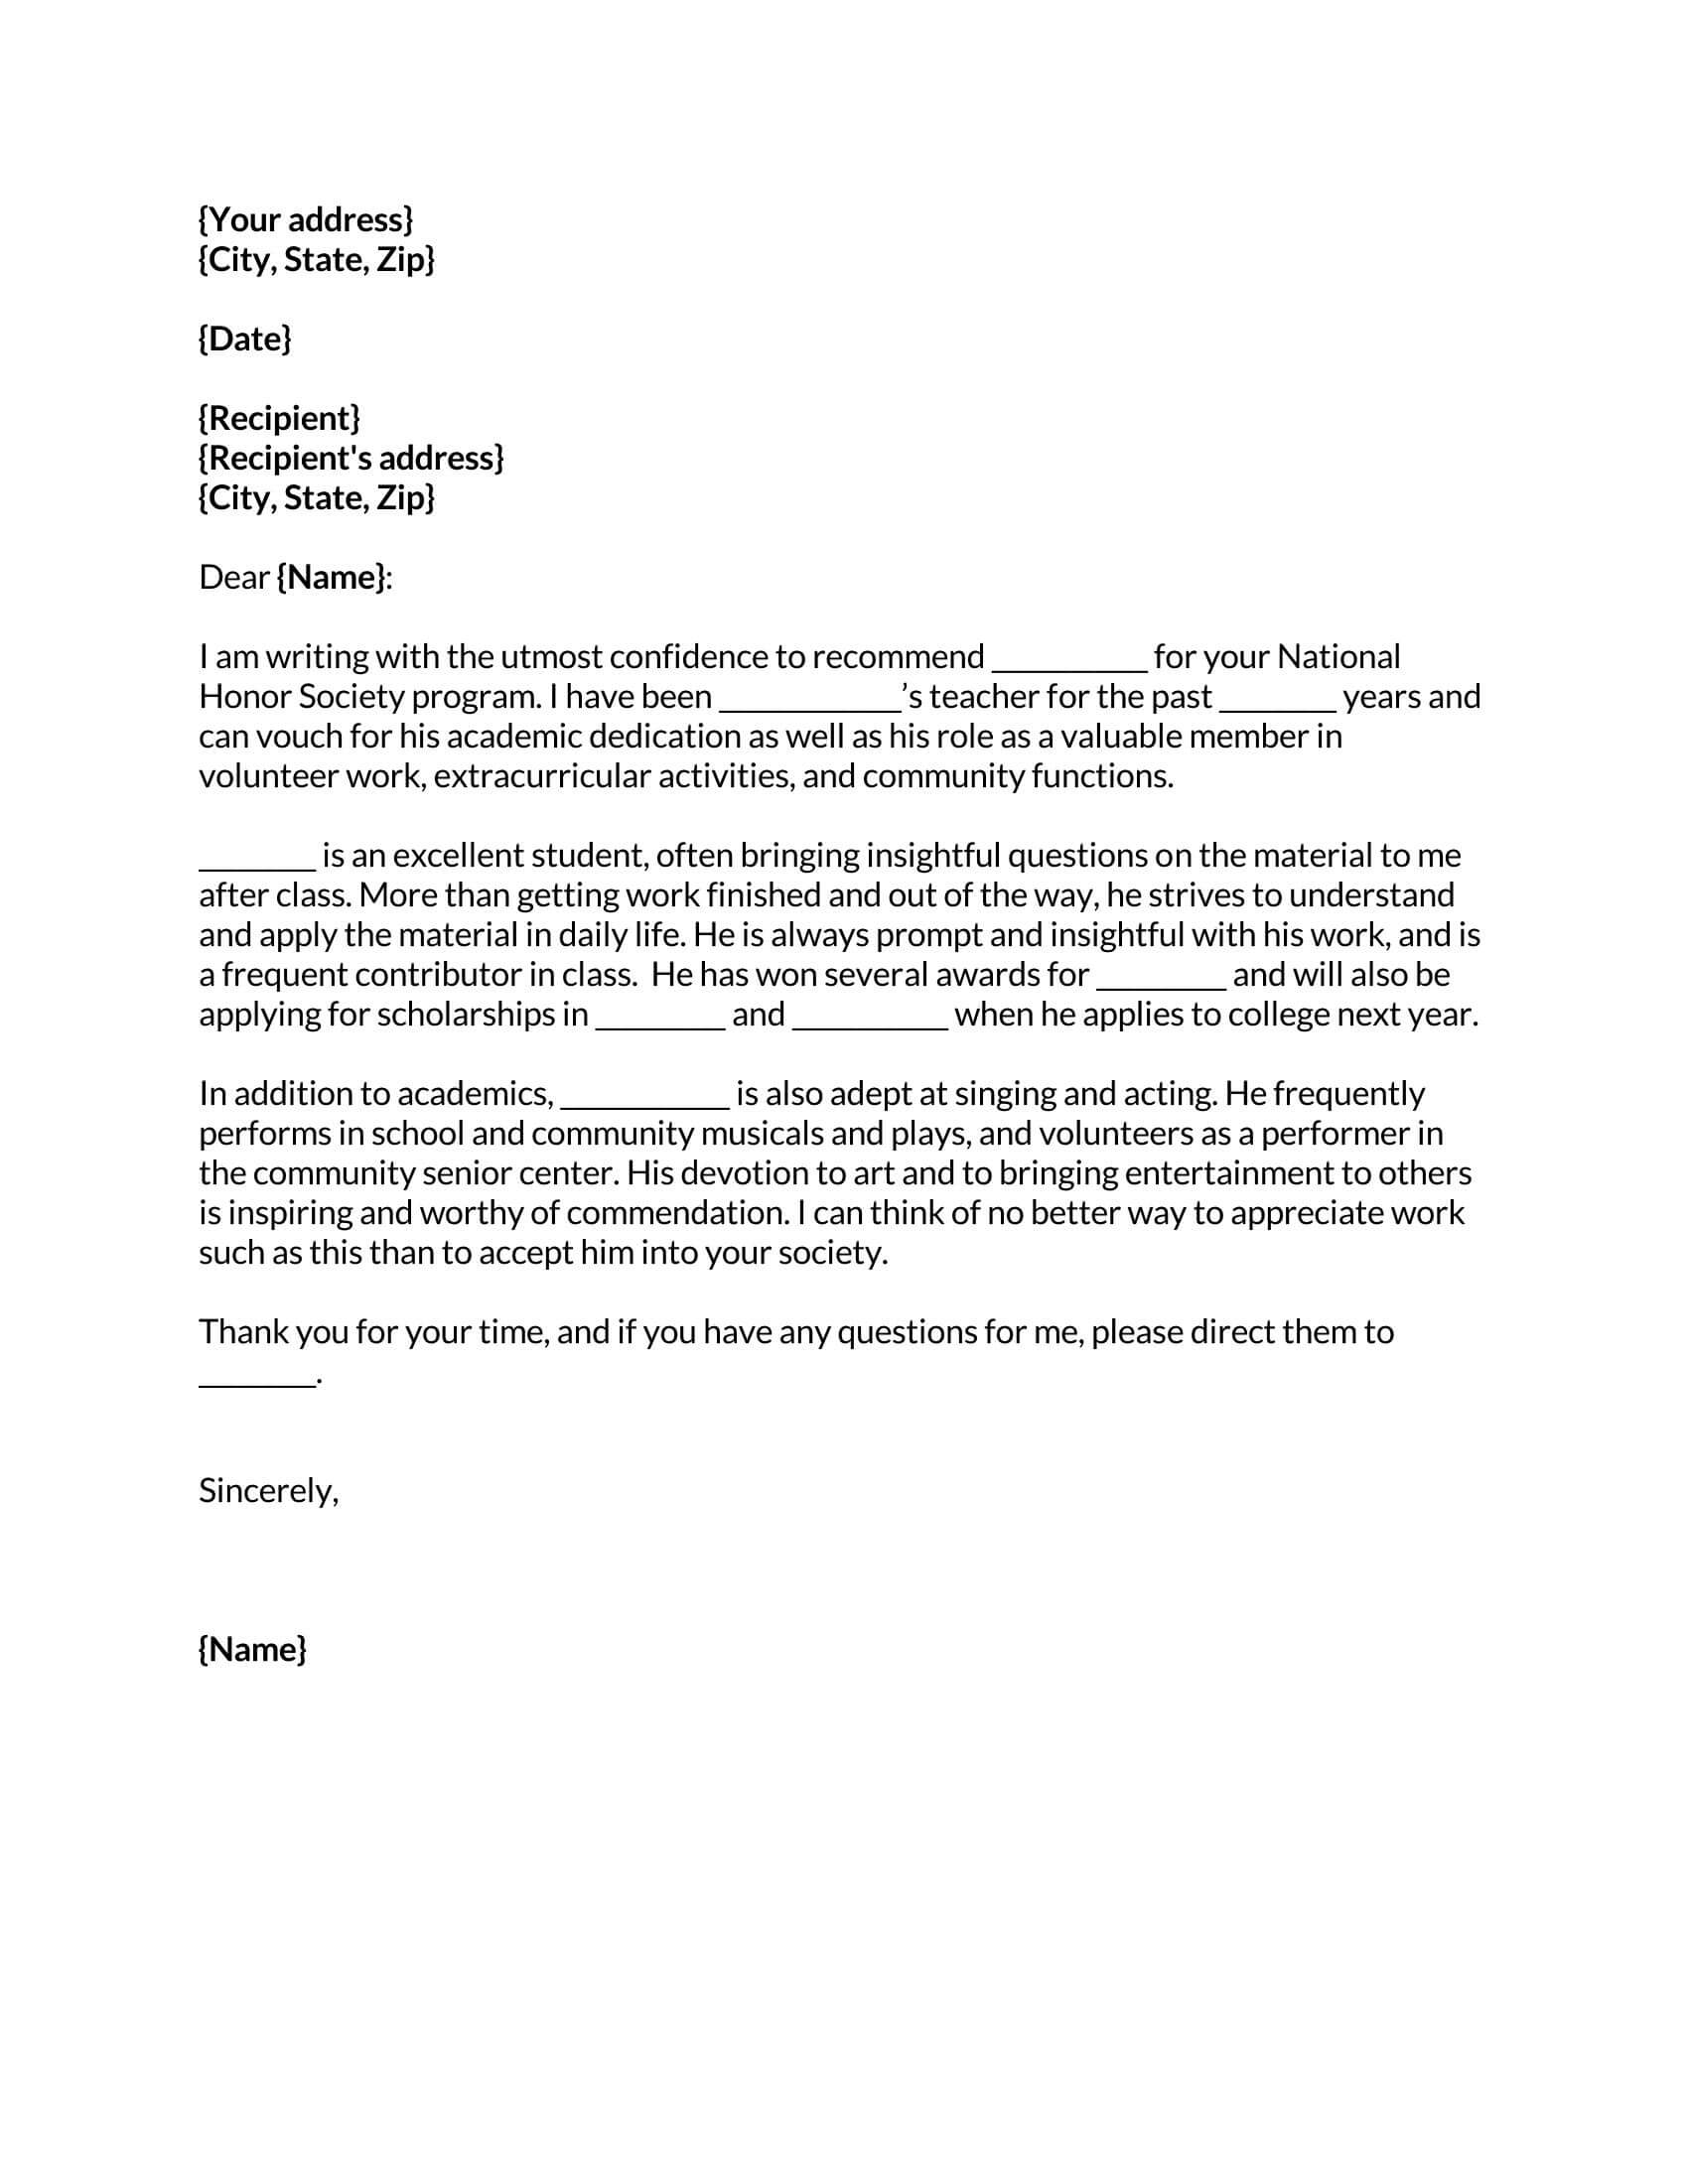 "Customizable Letter of Recommendation Template"